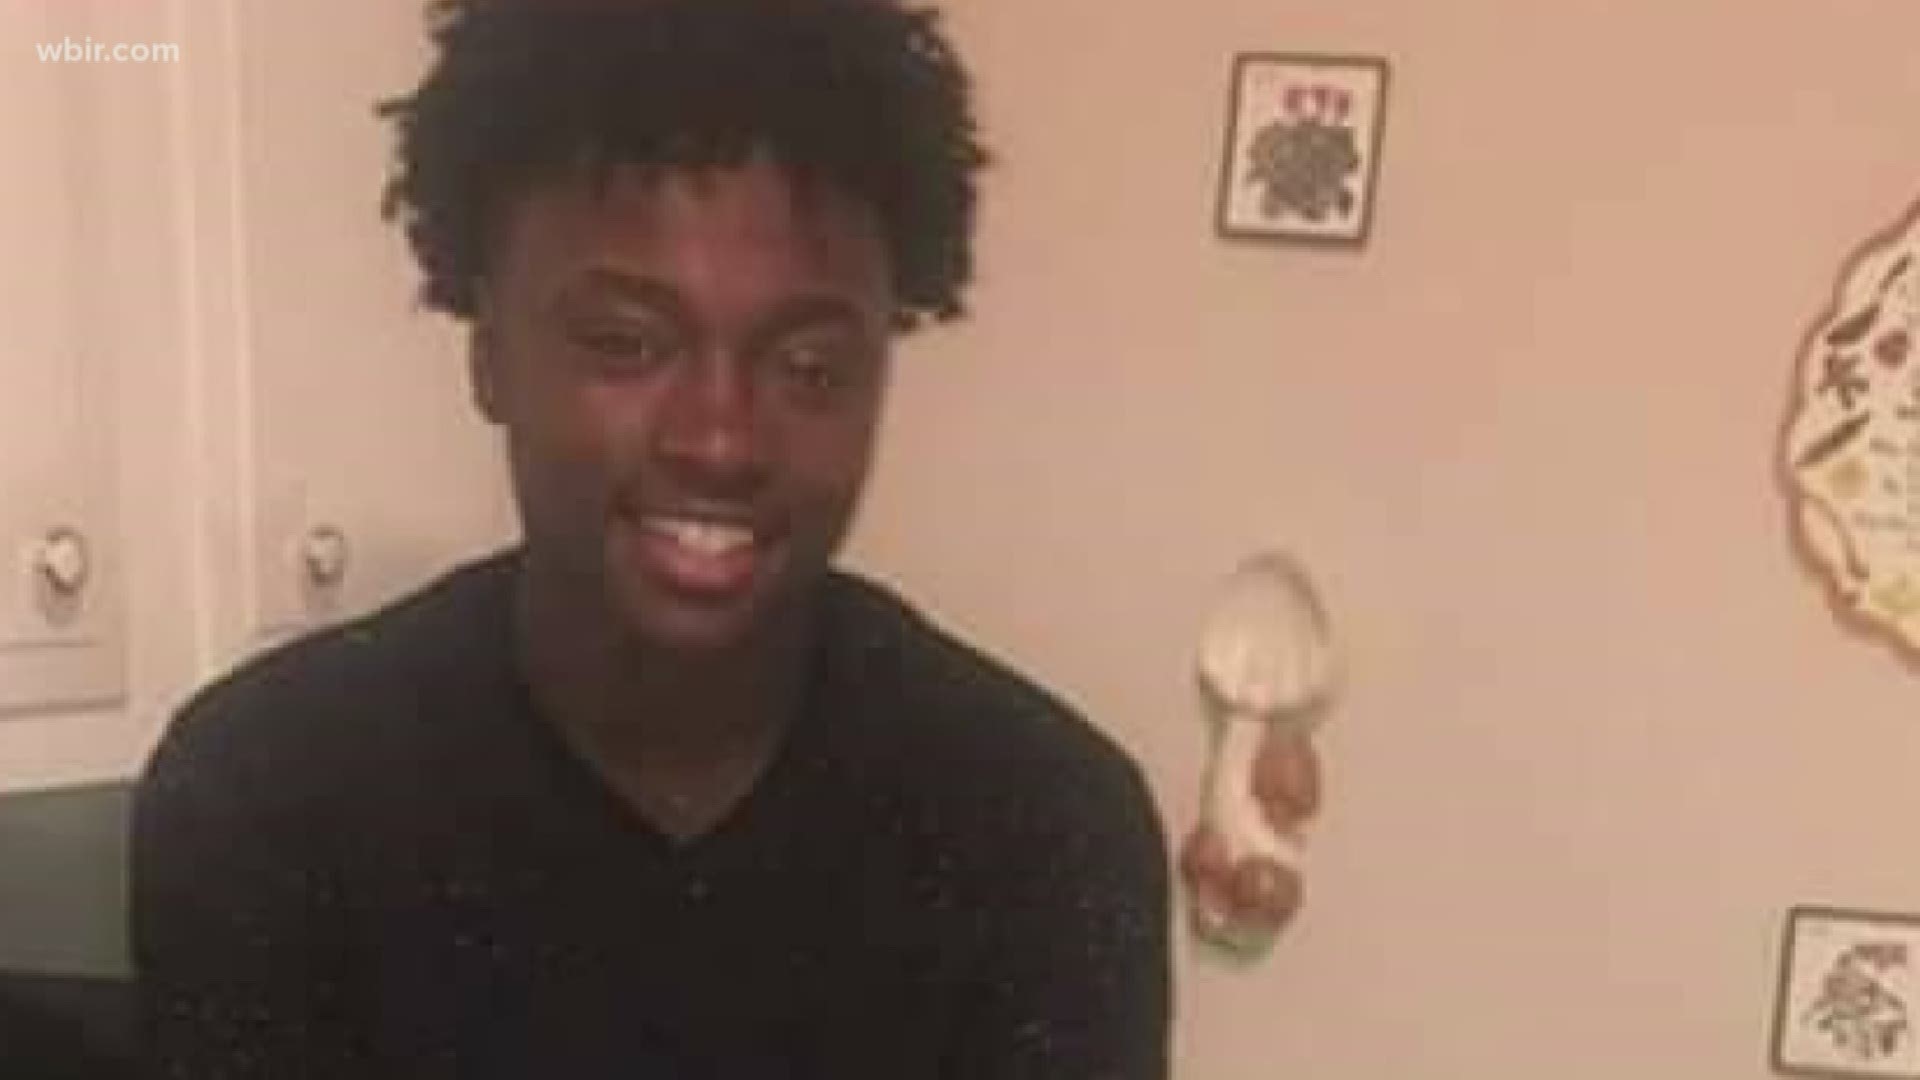 April 24, 2018: Family members are mourning 18-year-old Mekhi Luster, who officials say was killed in a shooting in West Knox County.